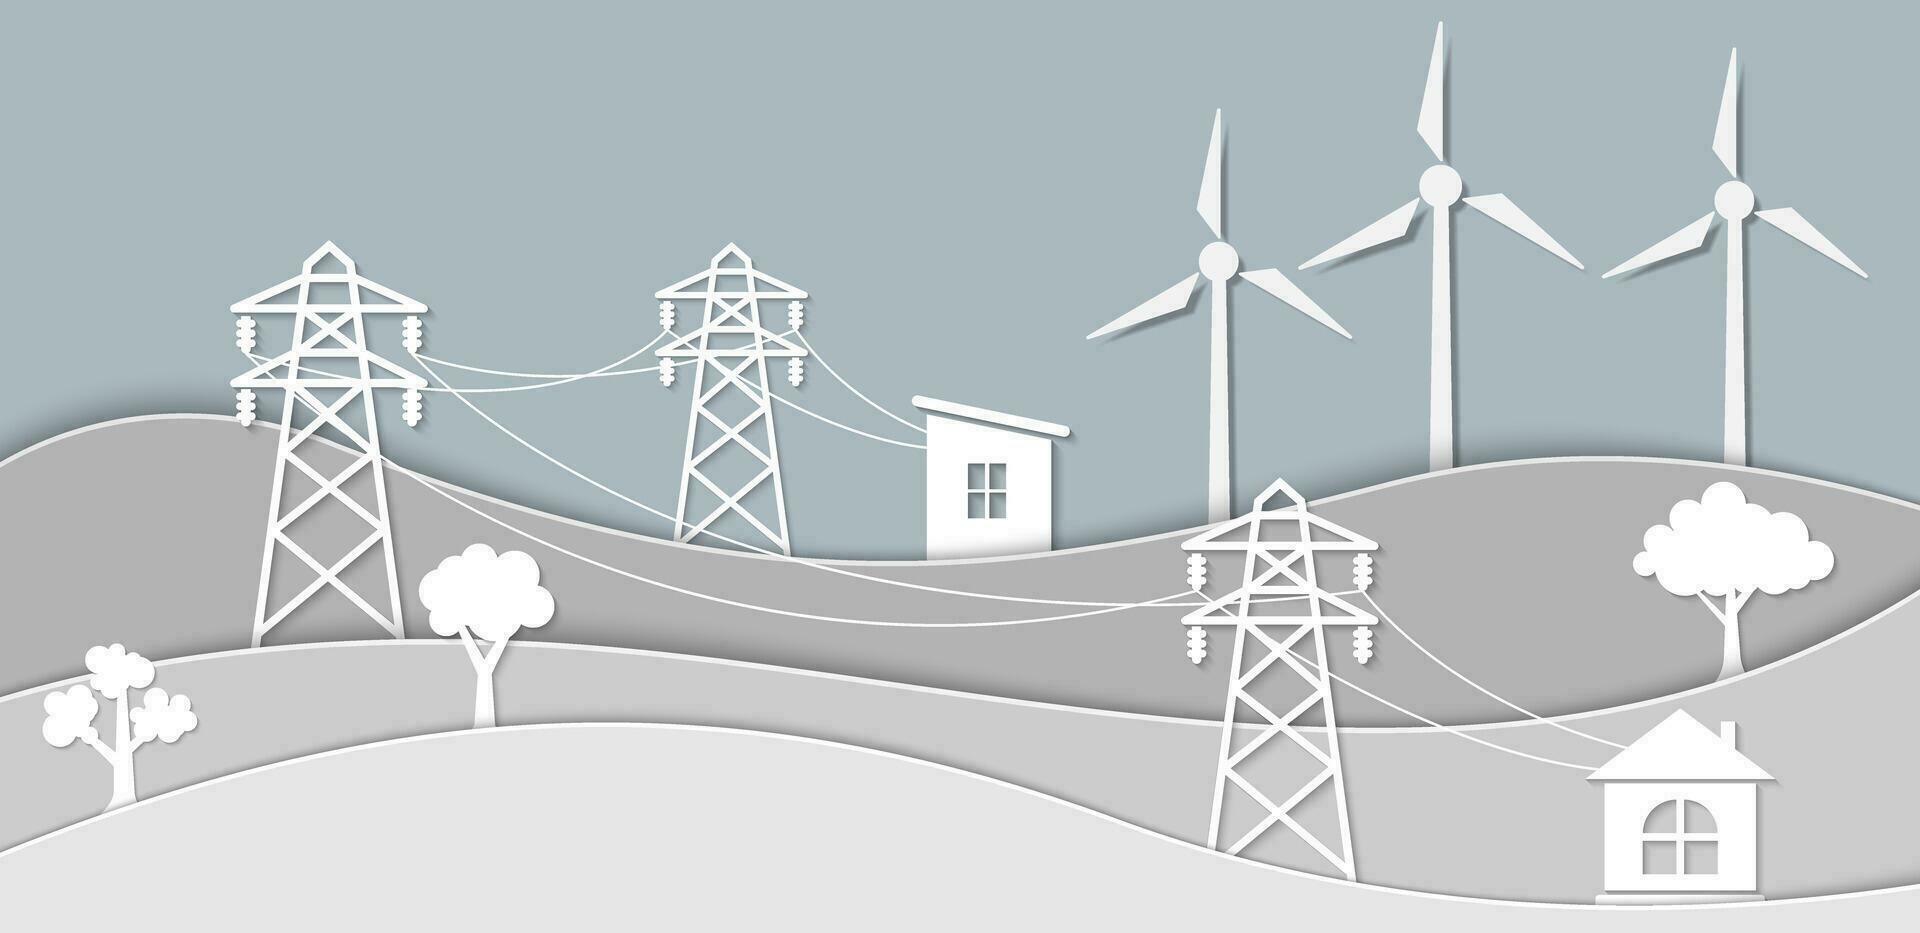 Monotone paper cut of renewable engery, wind turbine friendly environment, sustainable ecosystem electricity concept vector